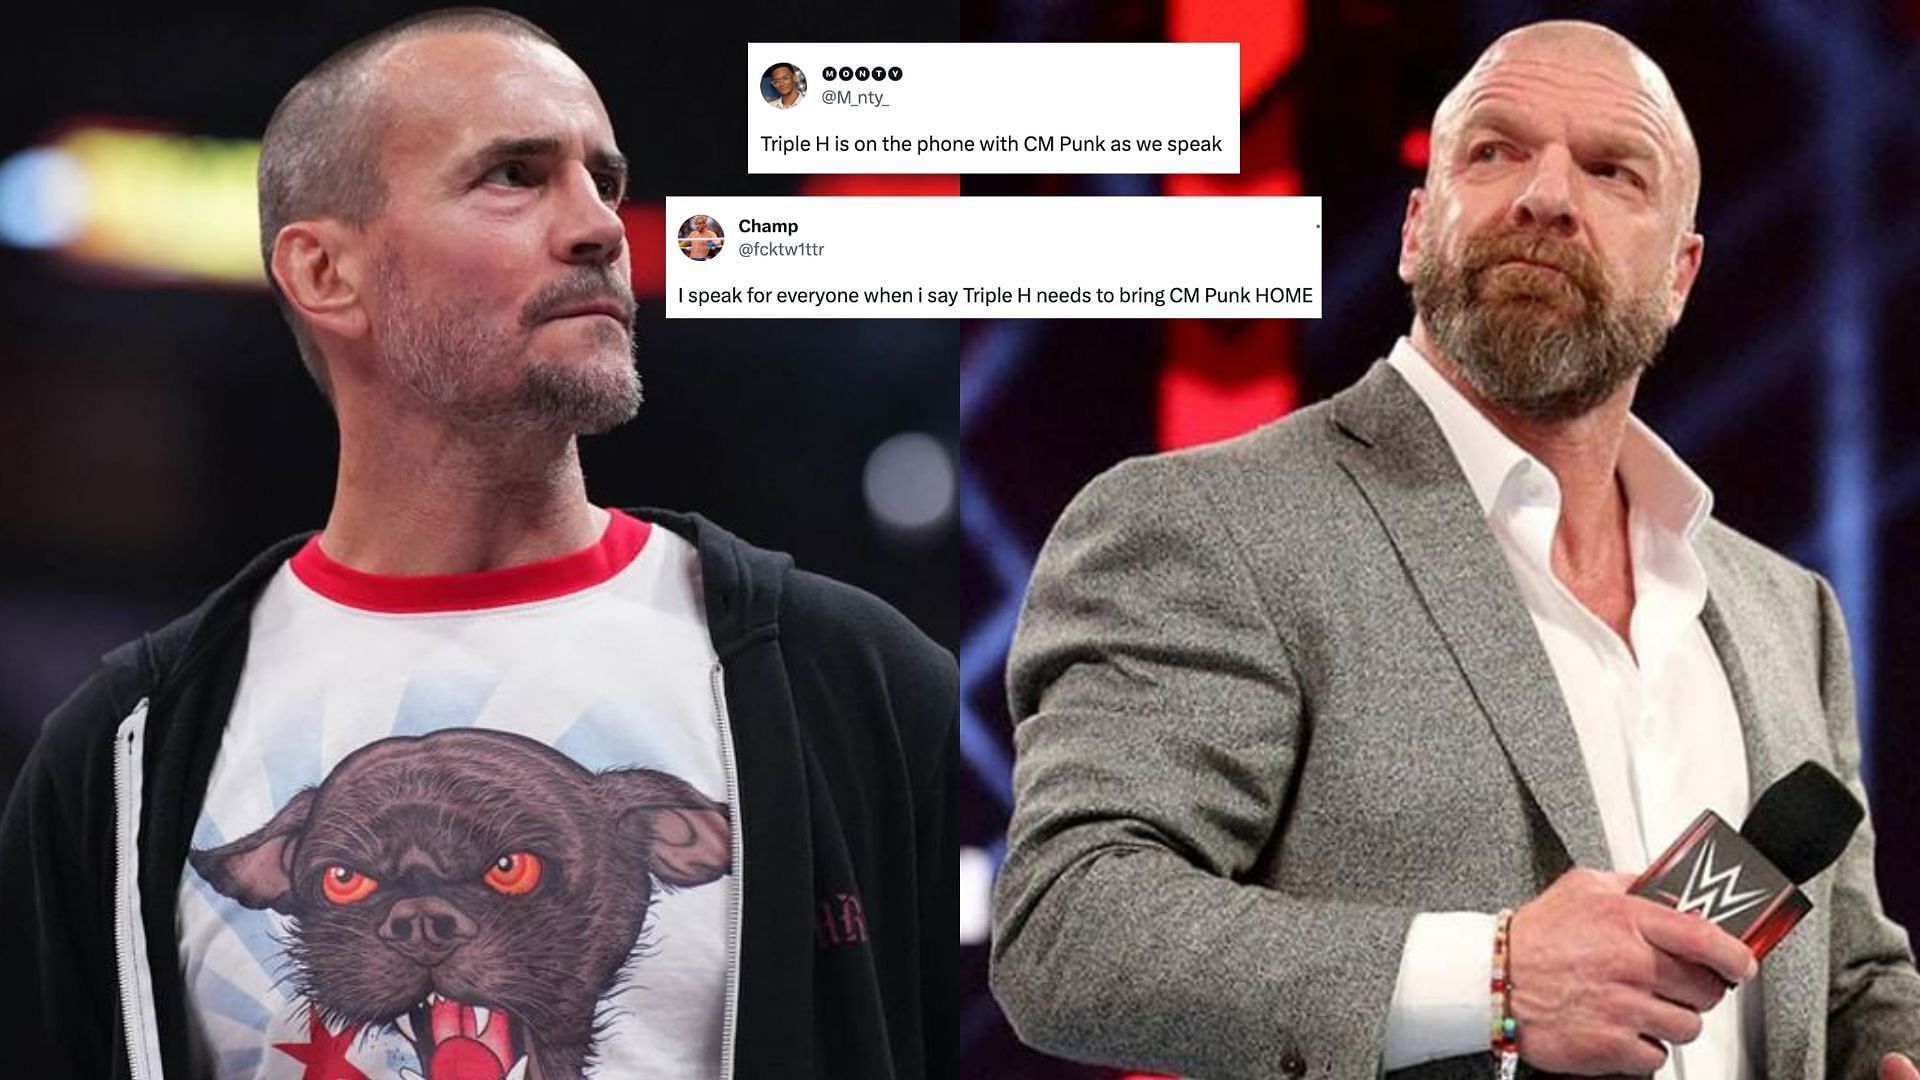 CM Punk was fired by AEW today.